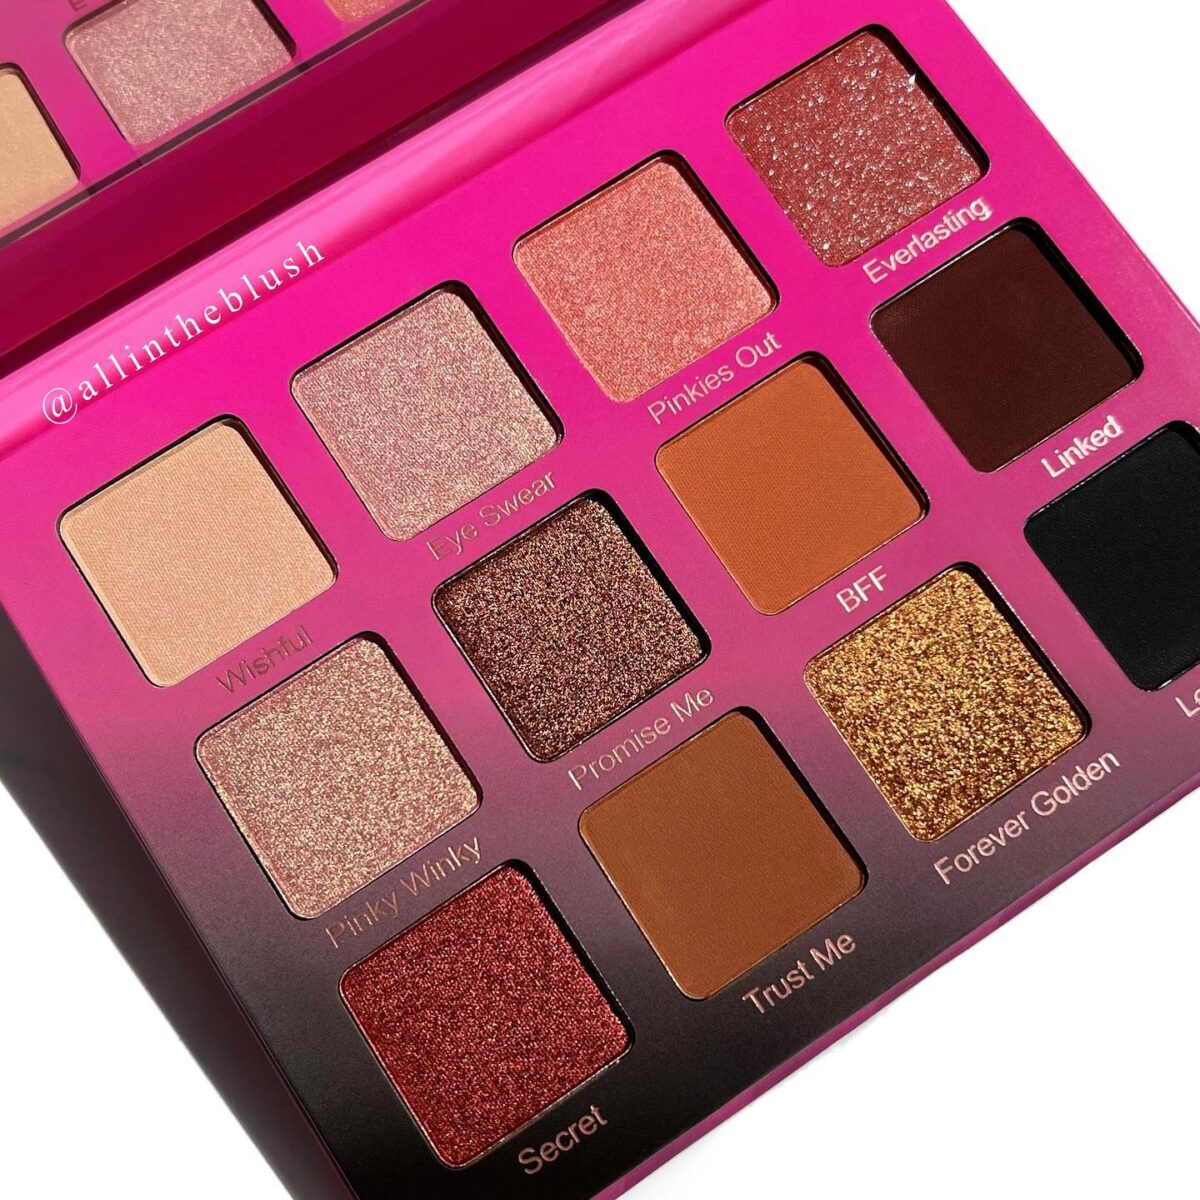 Violet Voss Eye Pinky Promise Palette Review